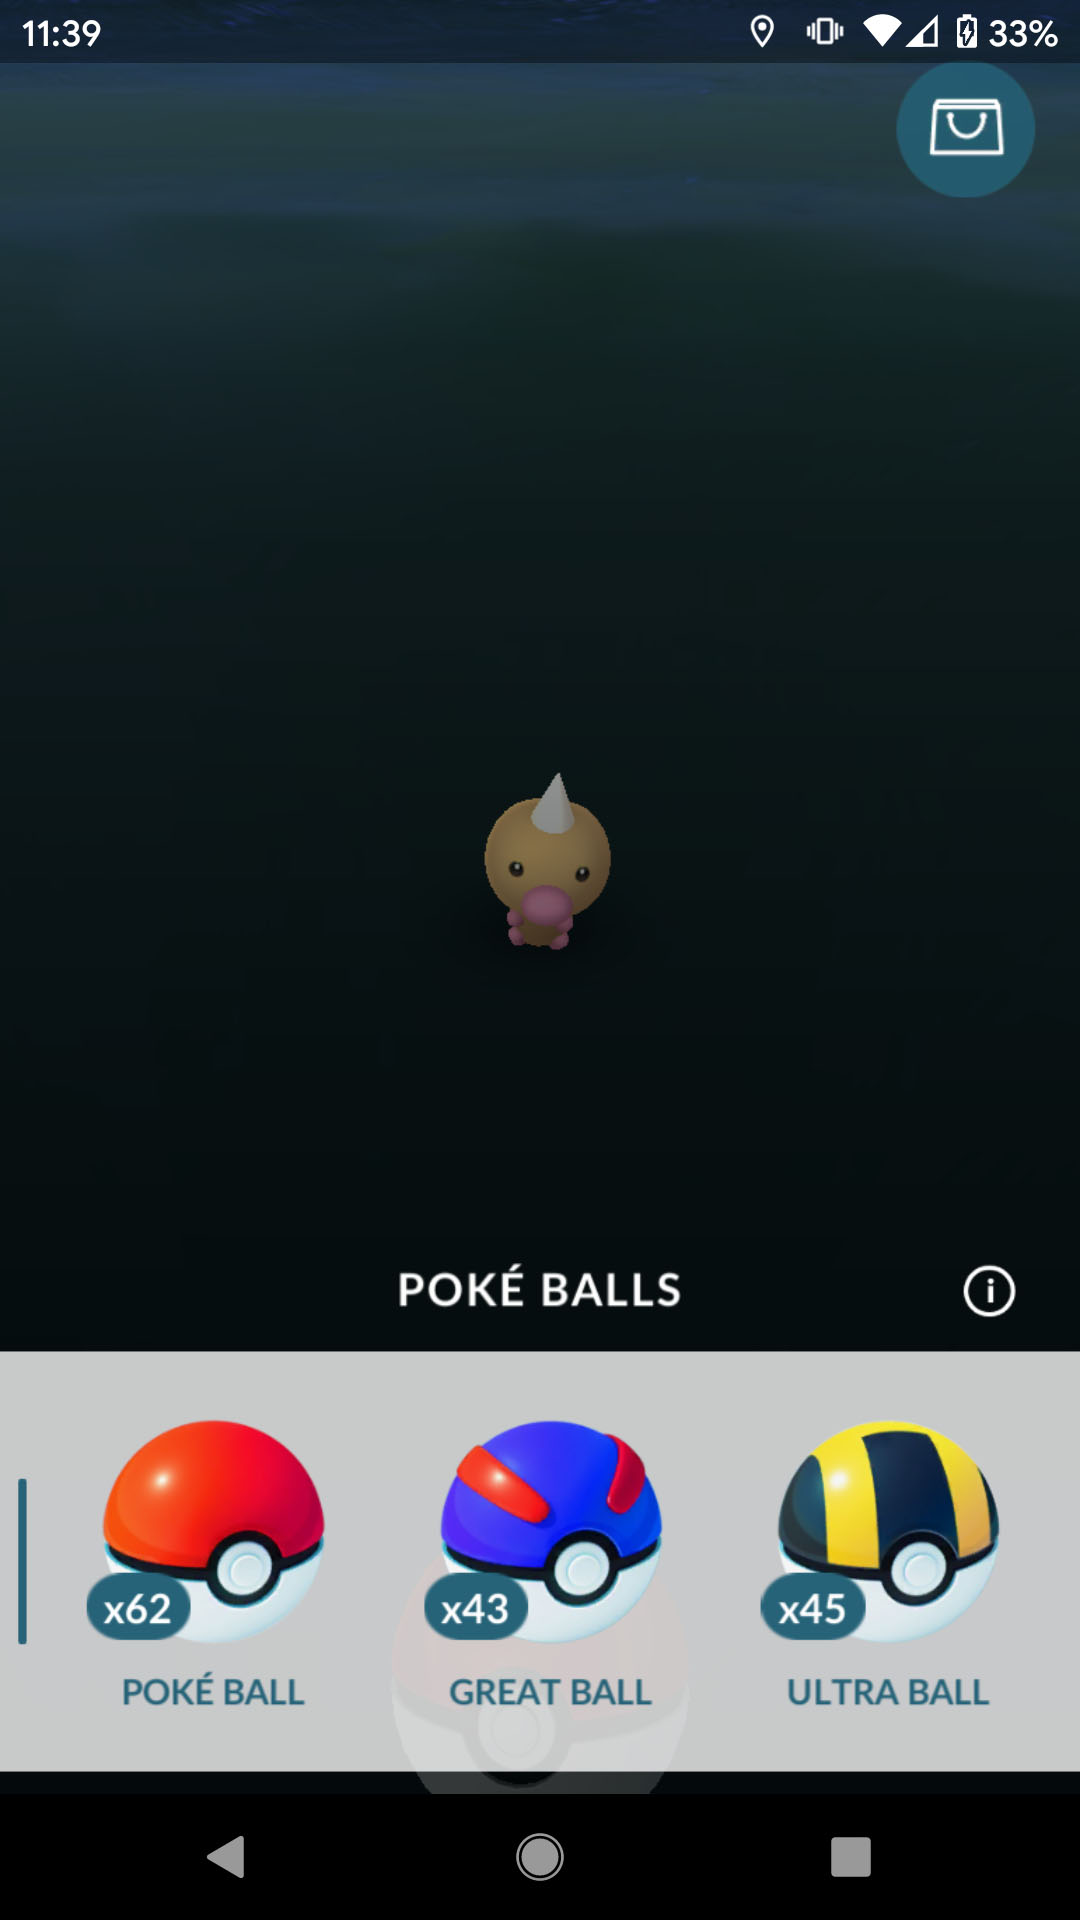 How to get Poké Balls, Great Balls and Ultra Balls in Pokémon Go